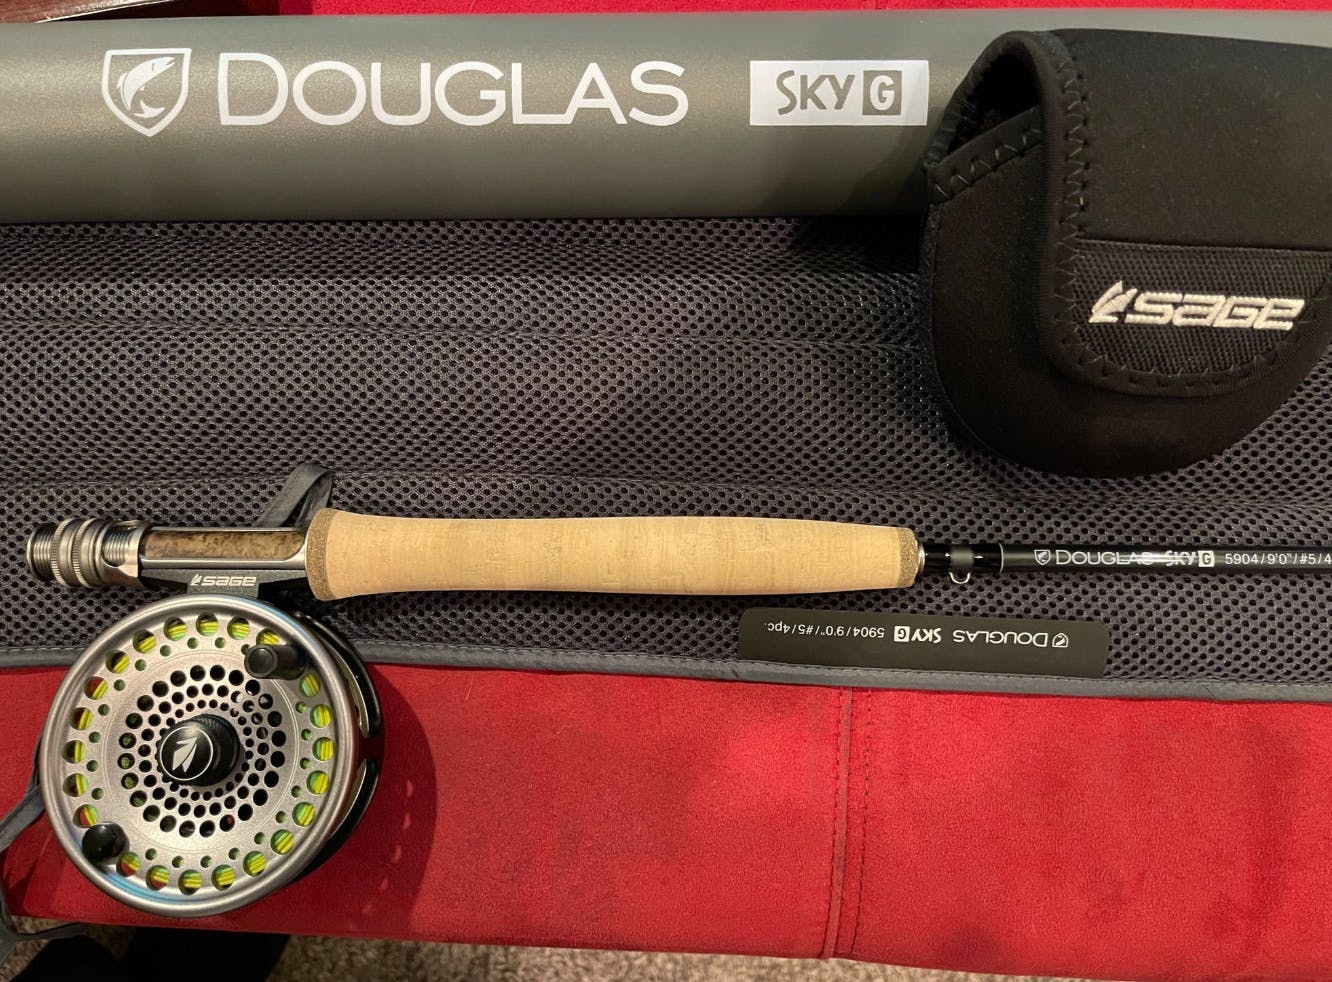 The Douglas SKY G Fly Rod laying on a table with its case and a Sage reel.